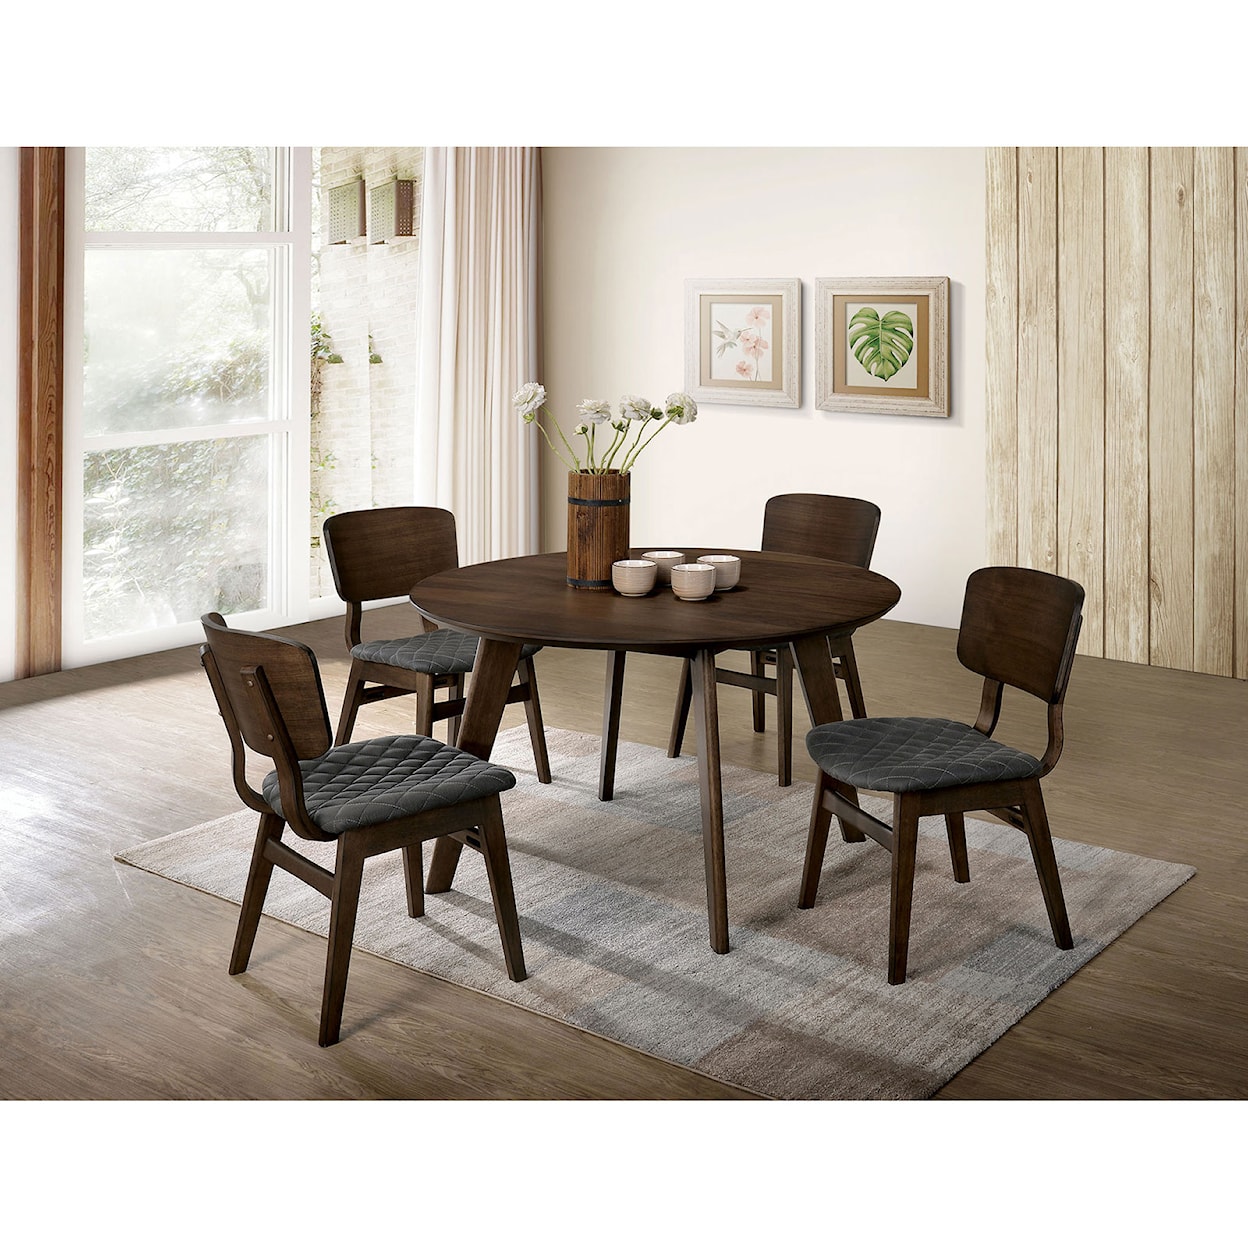 Furniture of America Shayna 5 Piece Dining Table Set